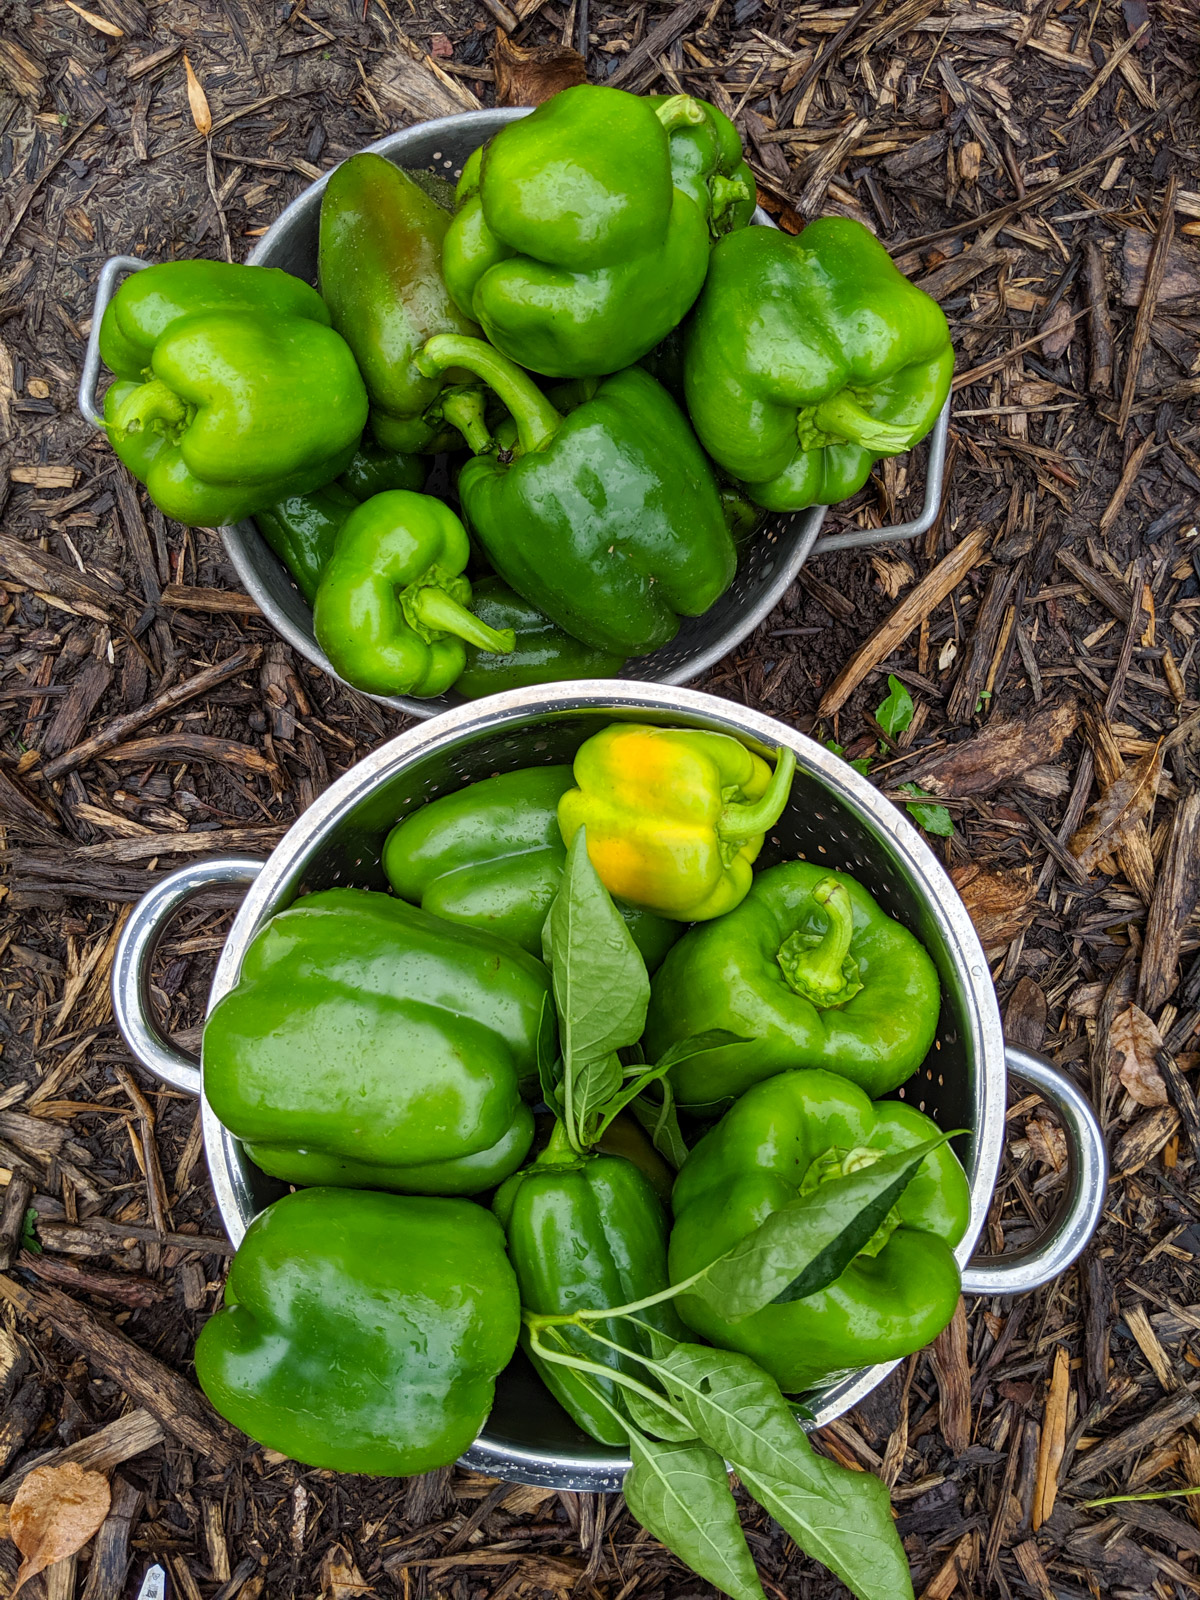 Two bowls of green bell peppers harvested before the cold.